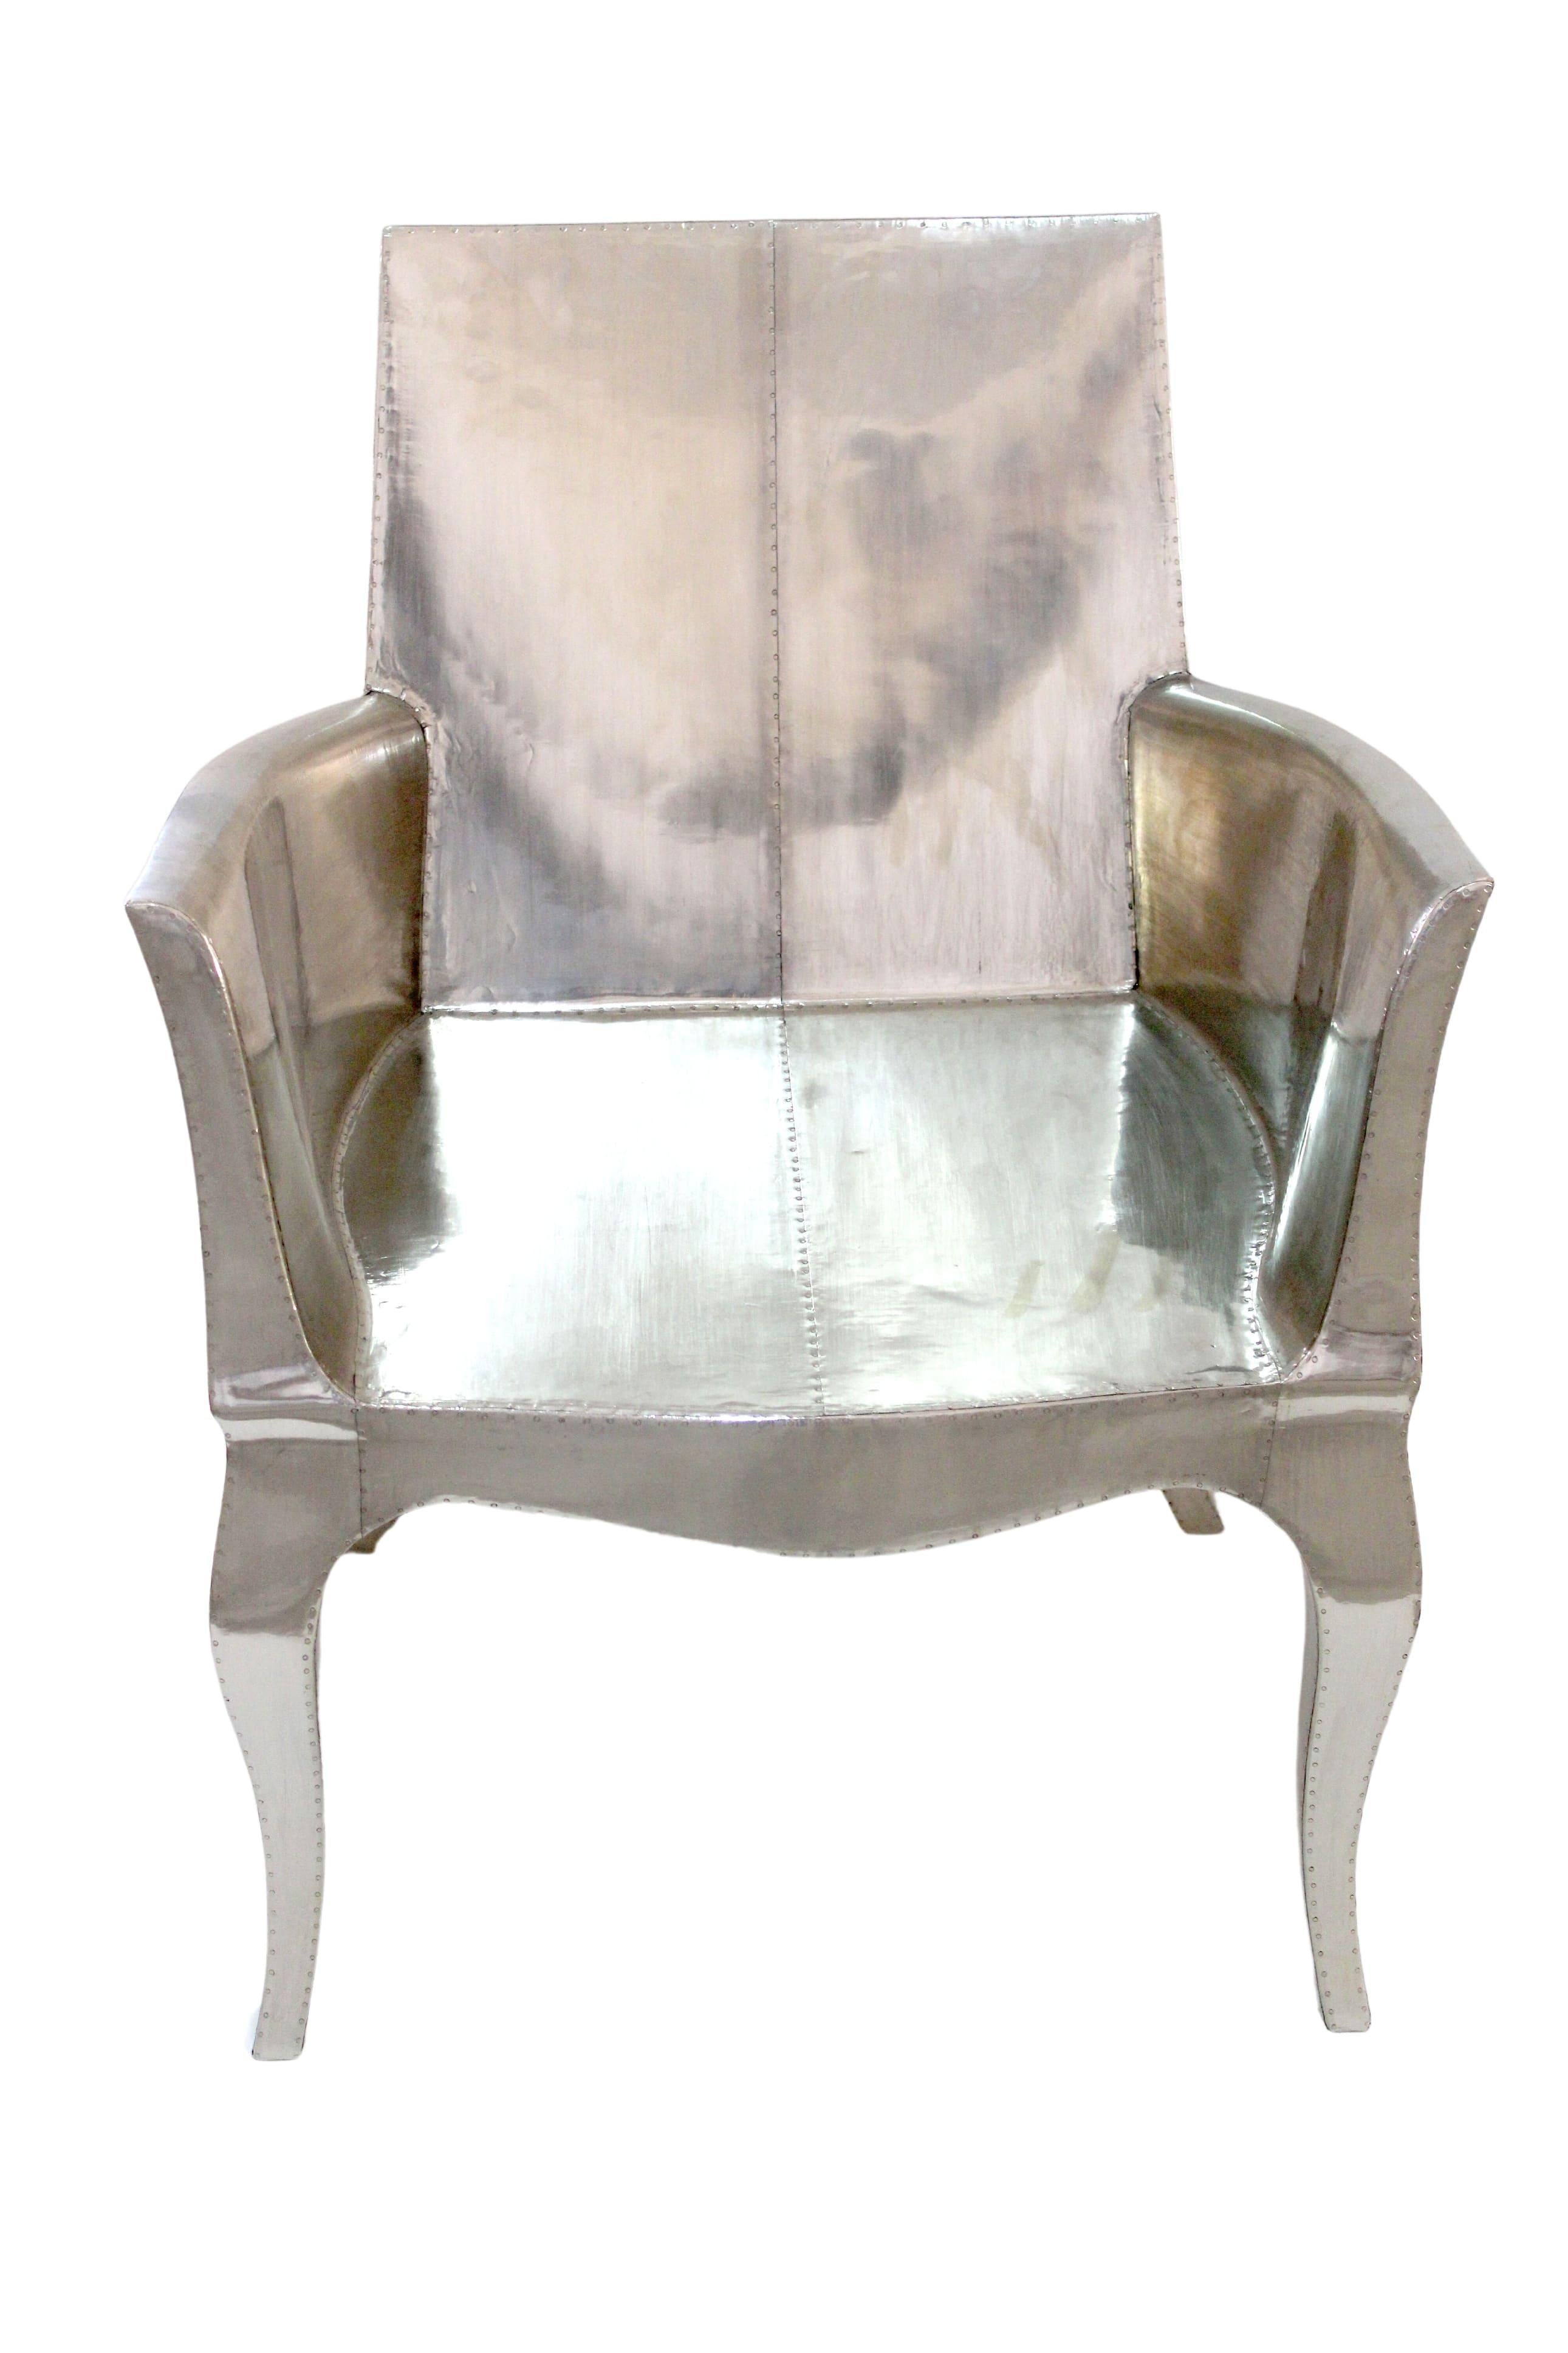 Art Deco Accent Chair Pair Designed by Paul Mathieu for Stephanie Odegard In New Condition For Sale In New York, NY